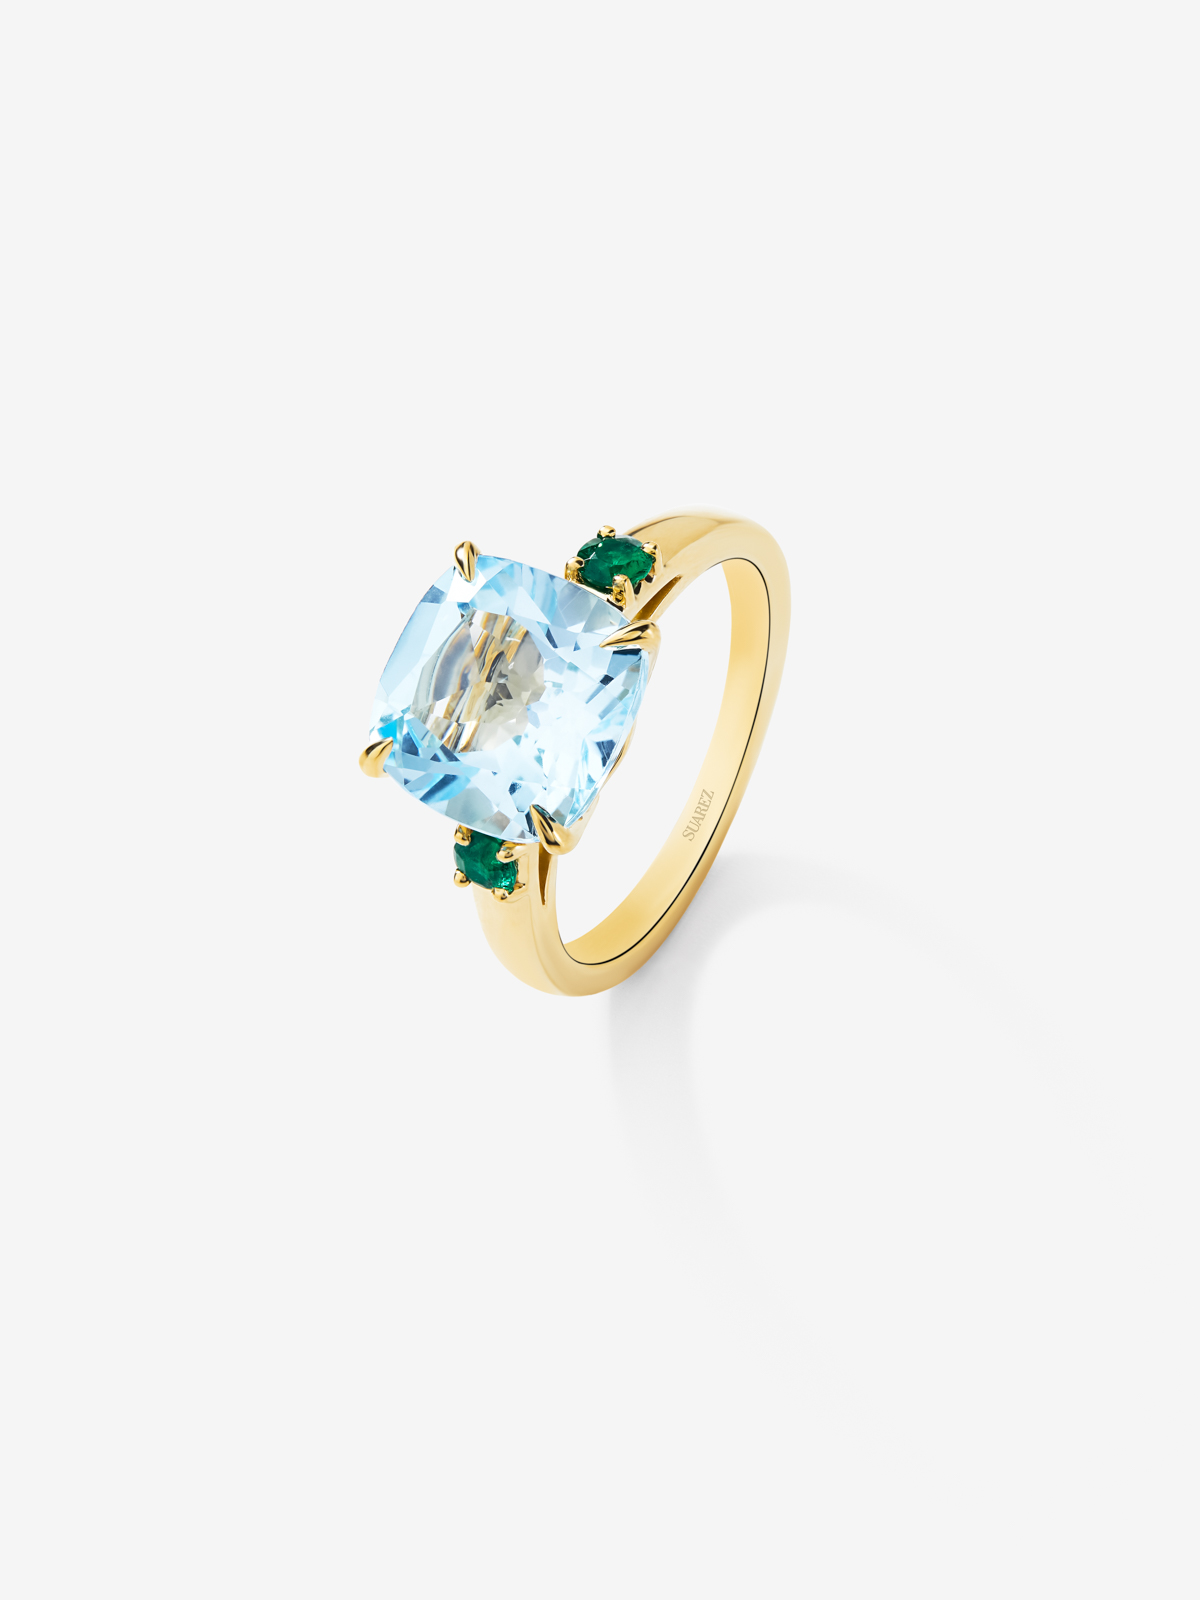 18k yellow gold ring with Sky blue topaz in 4.88 cts and green -bright emeralds in bright size